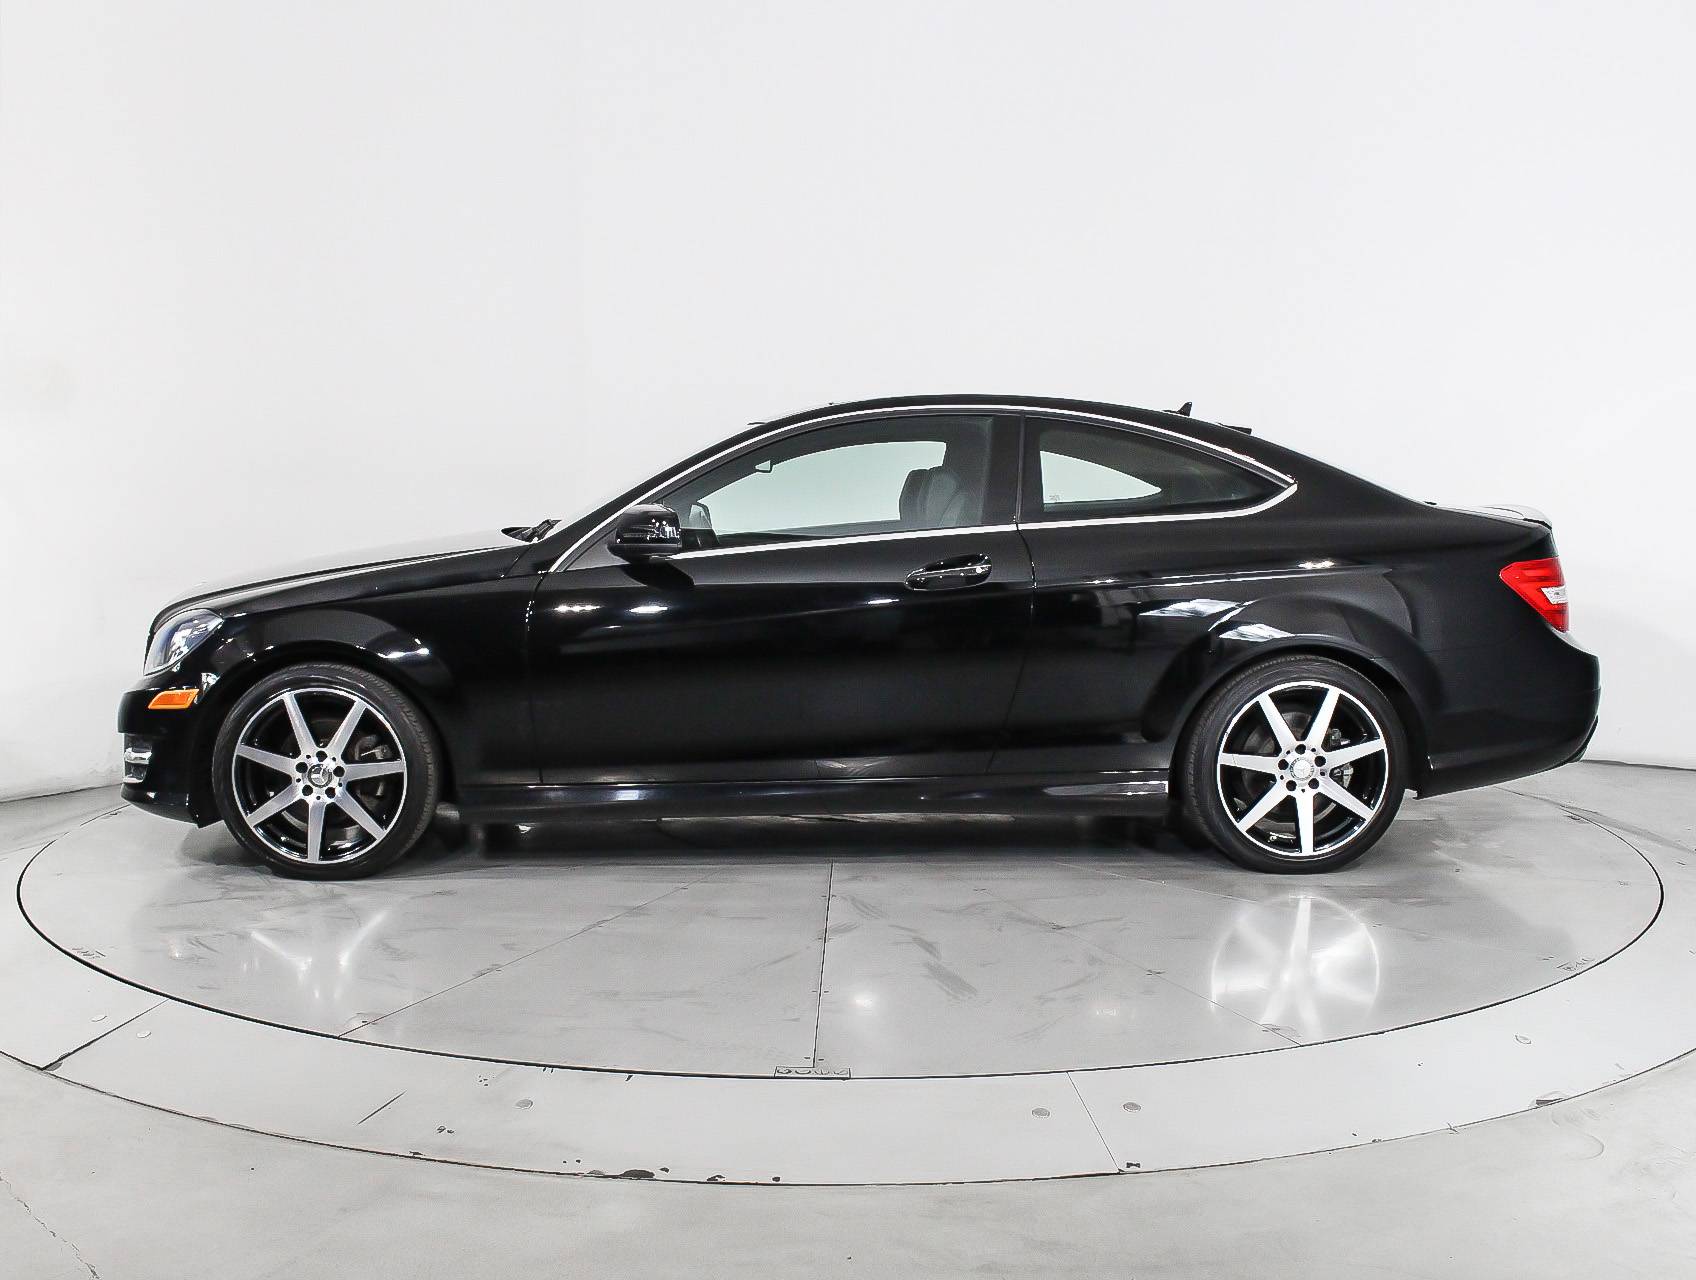 Used 15 Mercedes Benz C Class C250 Coupe For Sale In Miami Fl Florida Fine Cars